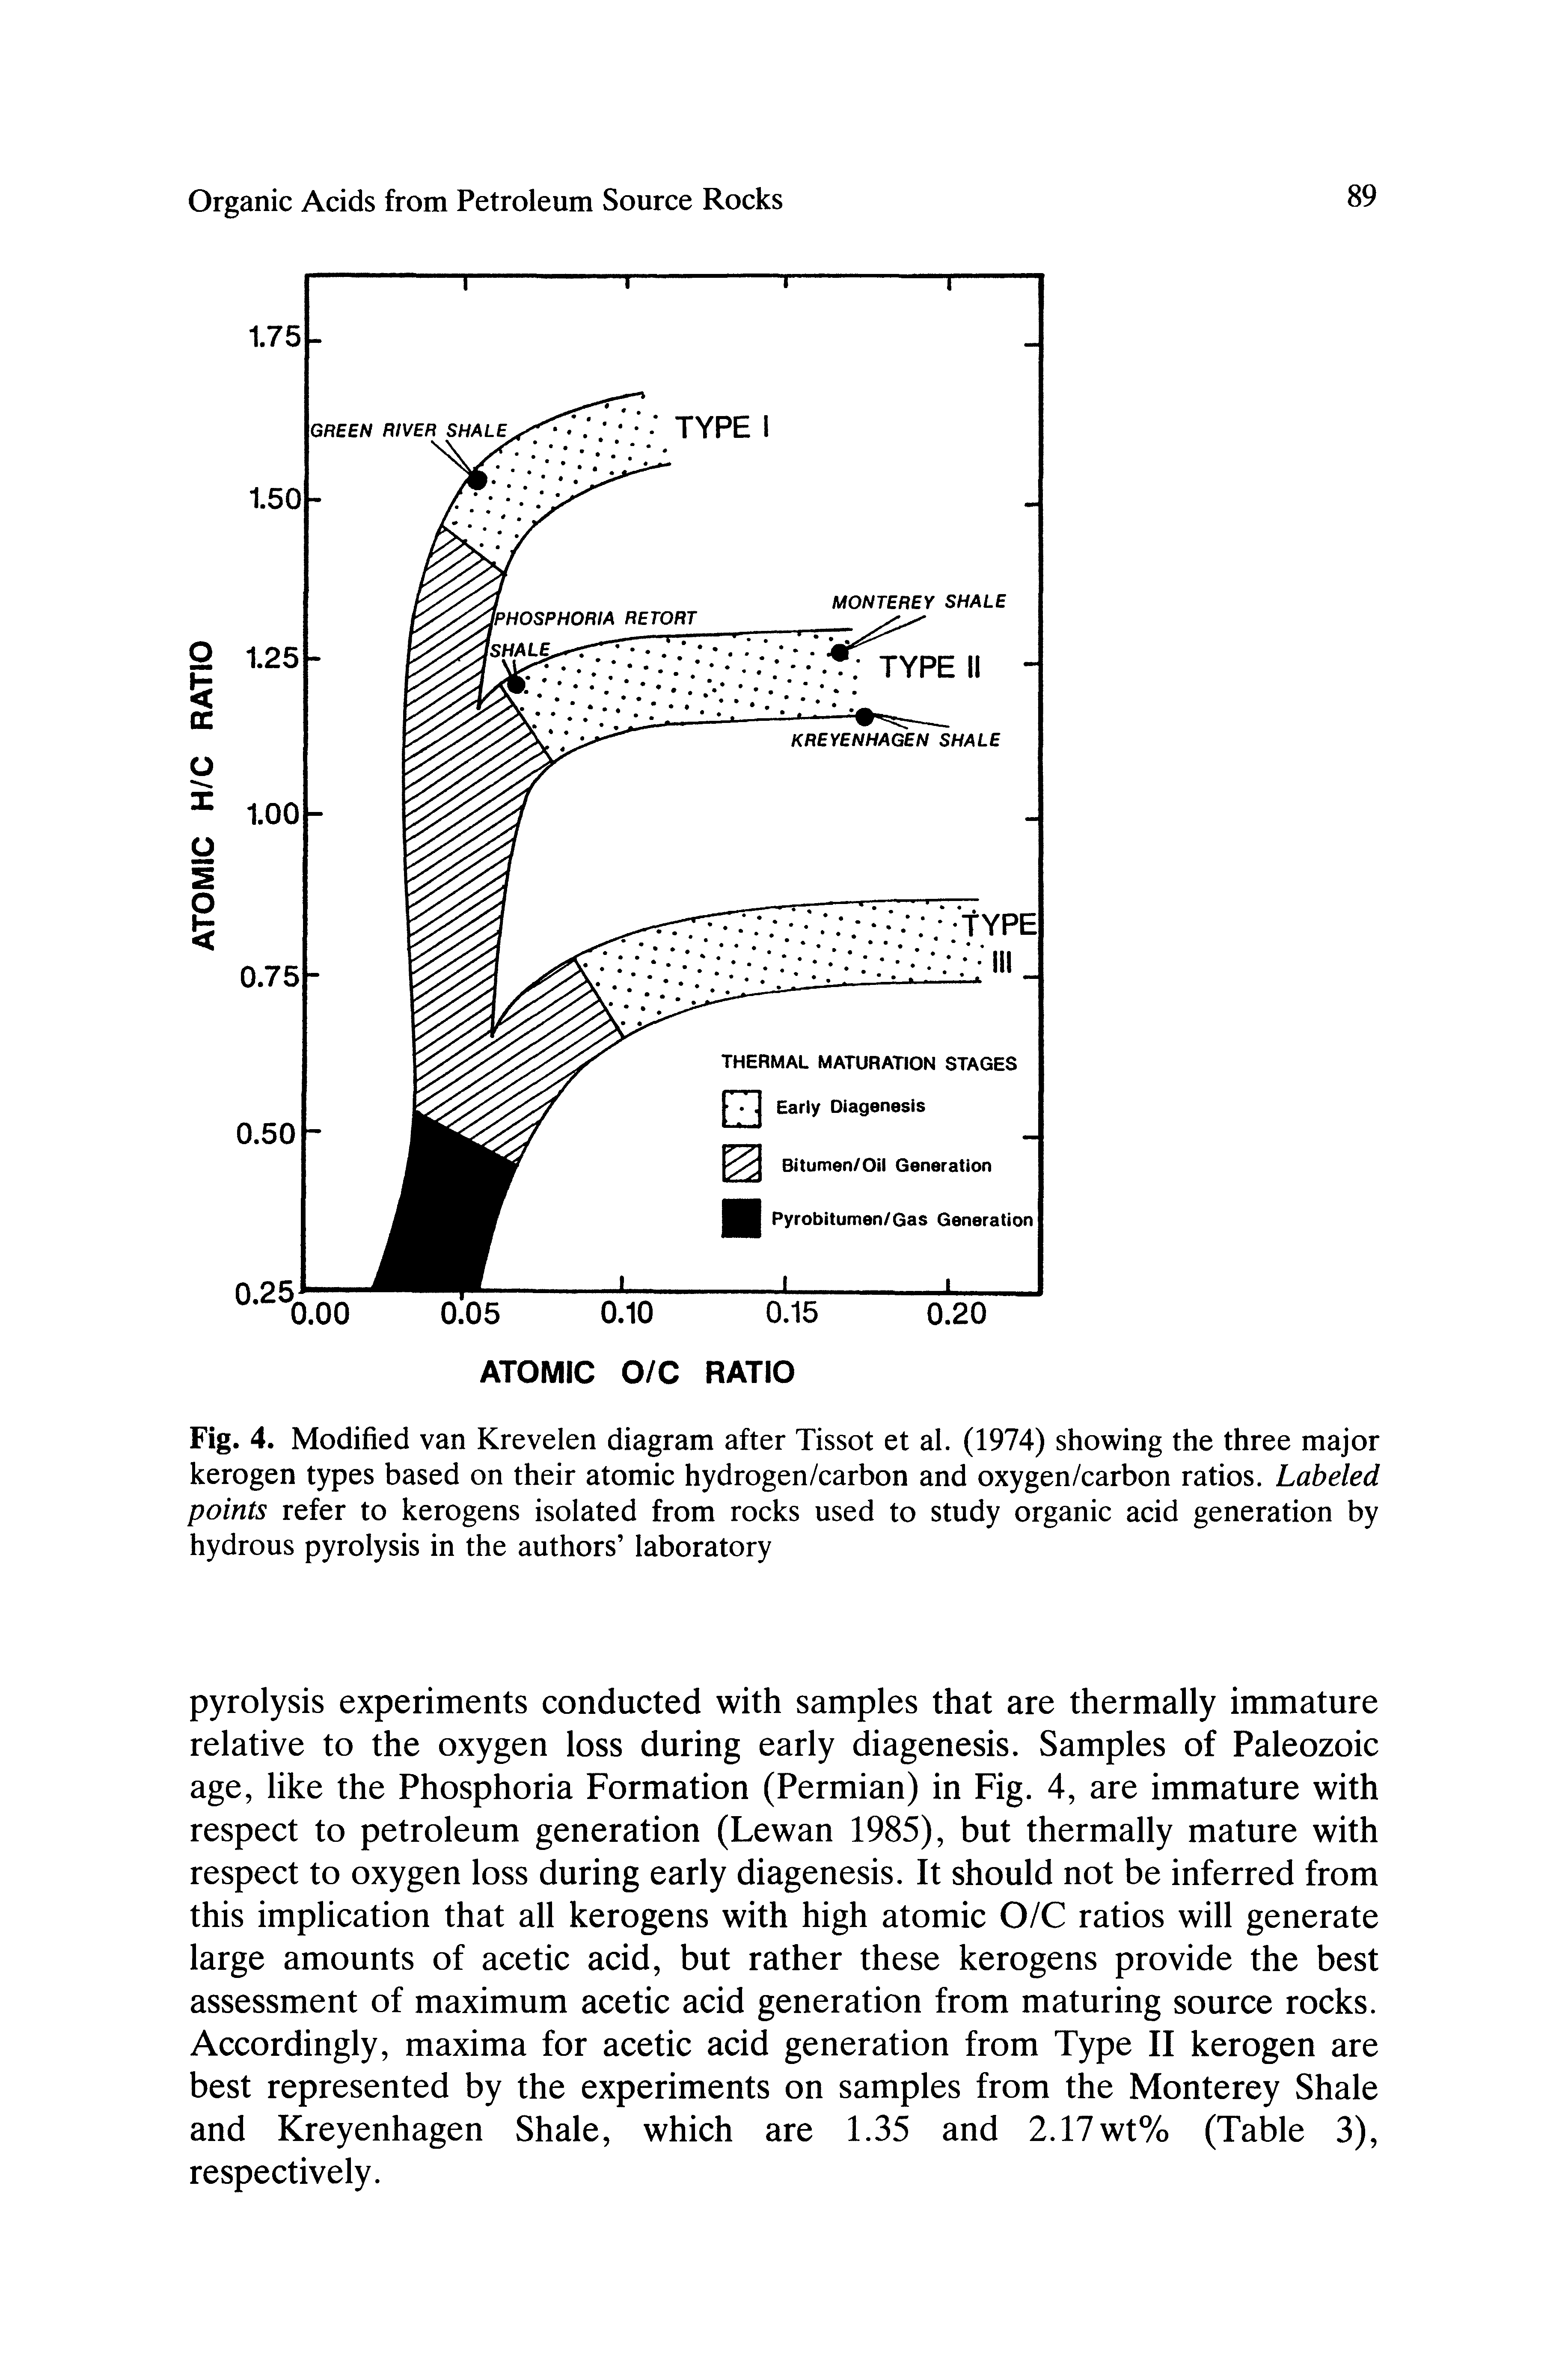 Fig. 4. Modified van Krevelen diagram after Tissot et al. (1974) showing the three major kerogen types based on their atomic hydrogen/carbon and oxygen/carbon ratios. Labeled points refer to kerogens isolated from rocks used to study organic acid generation by hydrous pyrolysis in the authors laboratory...